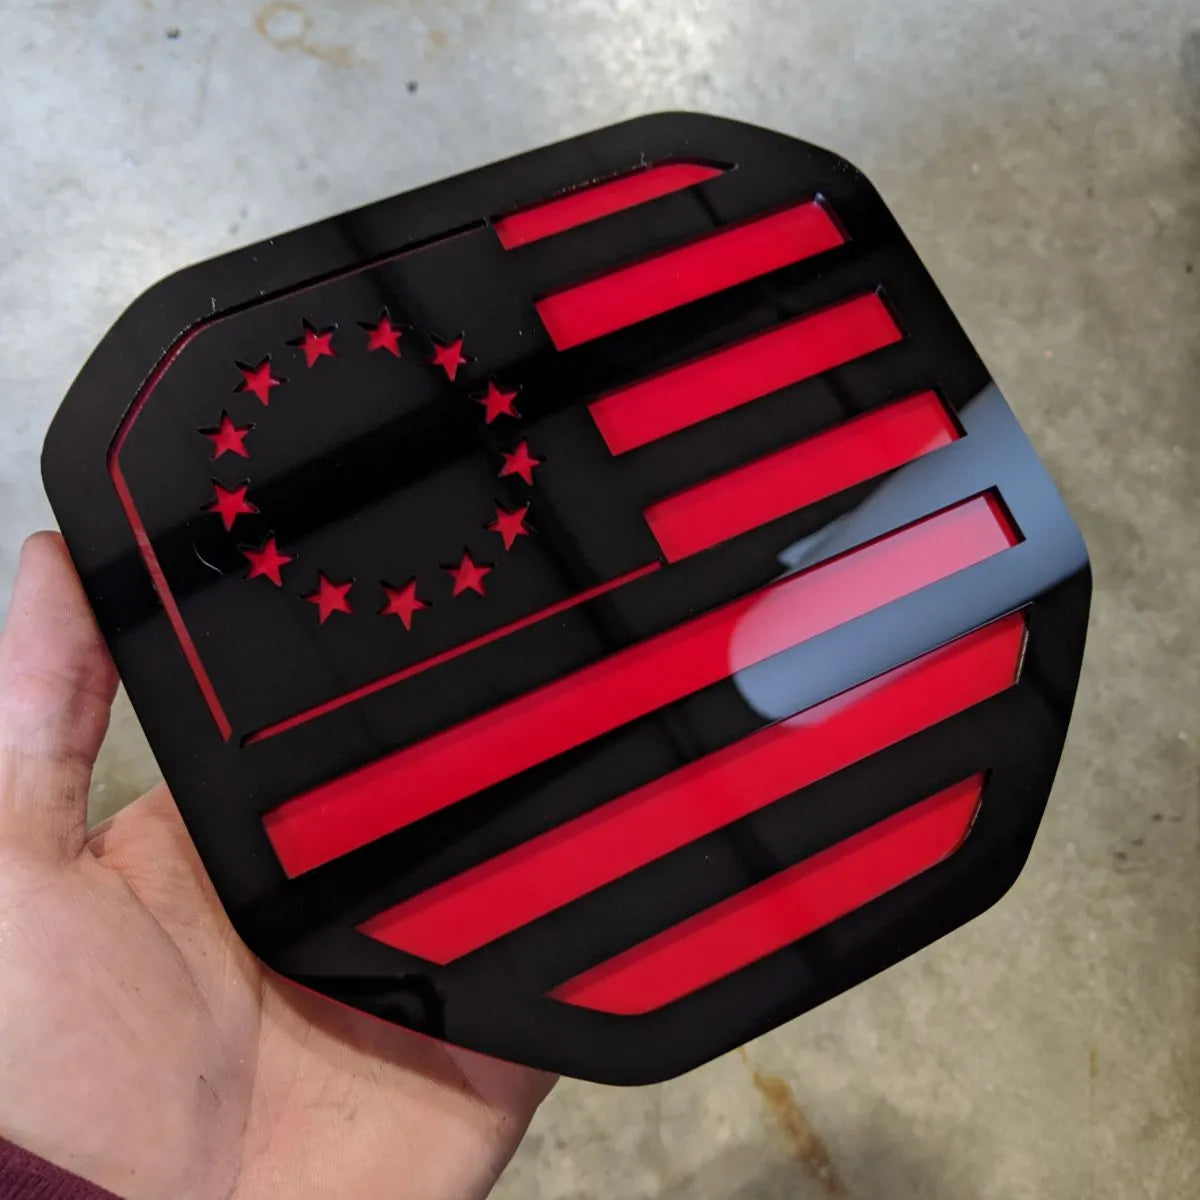 Betsy Ross American Flag Badge - Fits 2019+ (5th Gen) Dodge® Ram® Tailgate -1500, 2500, 3500 - Black on Red